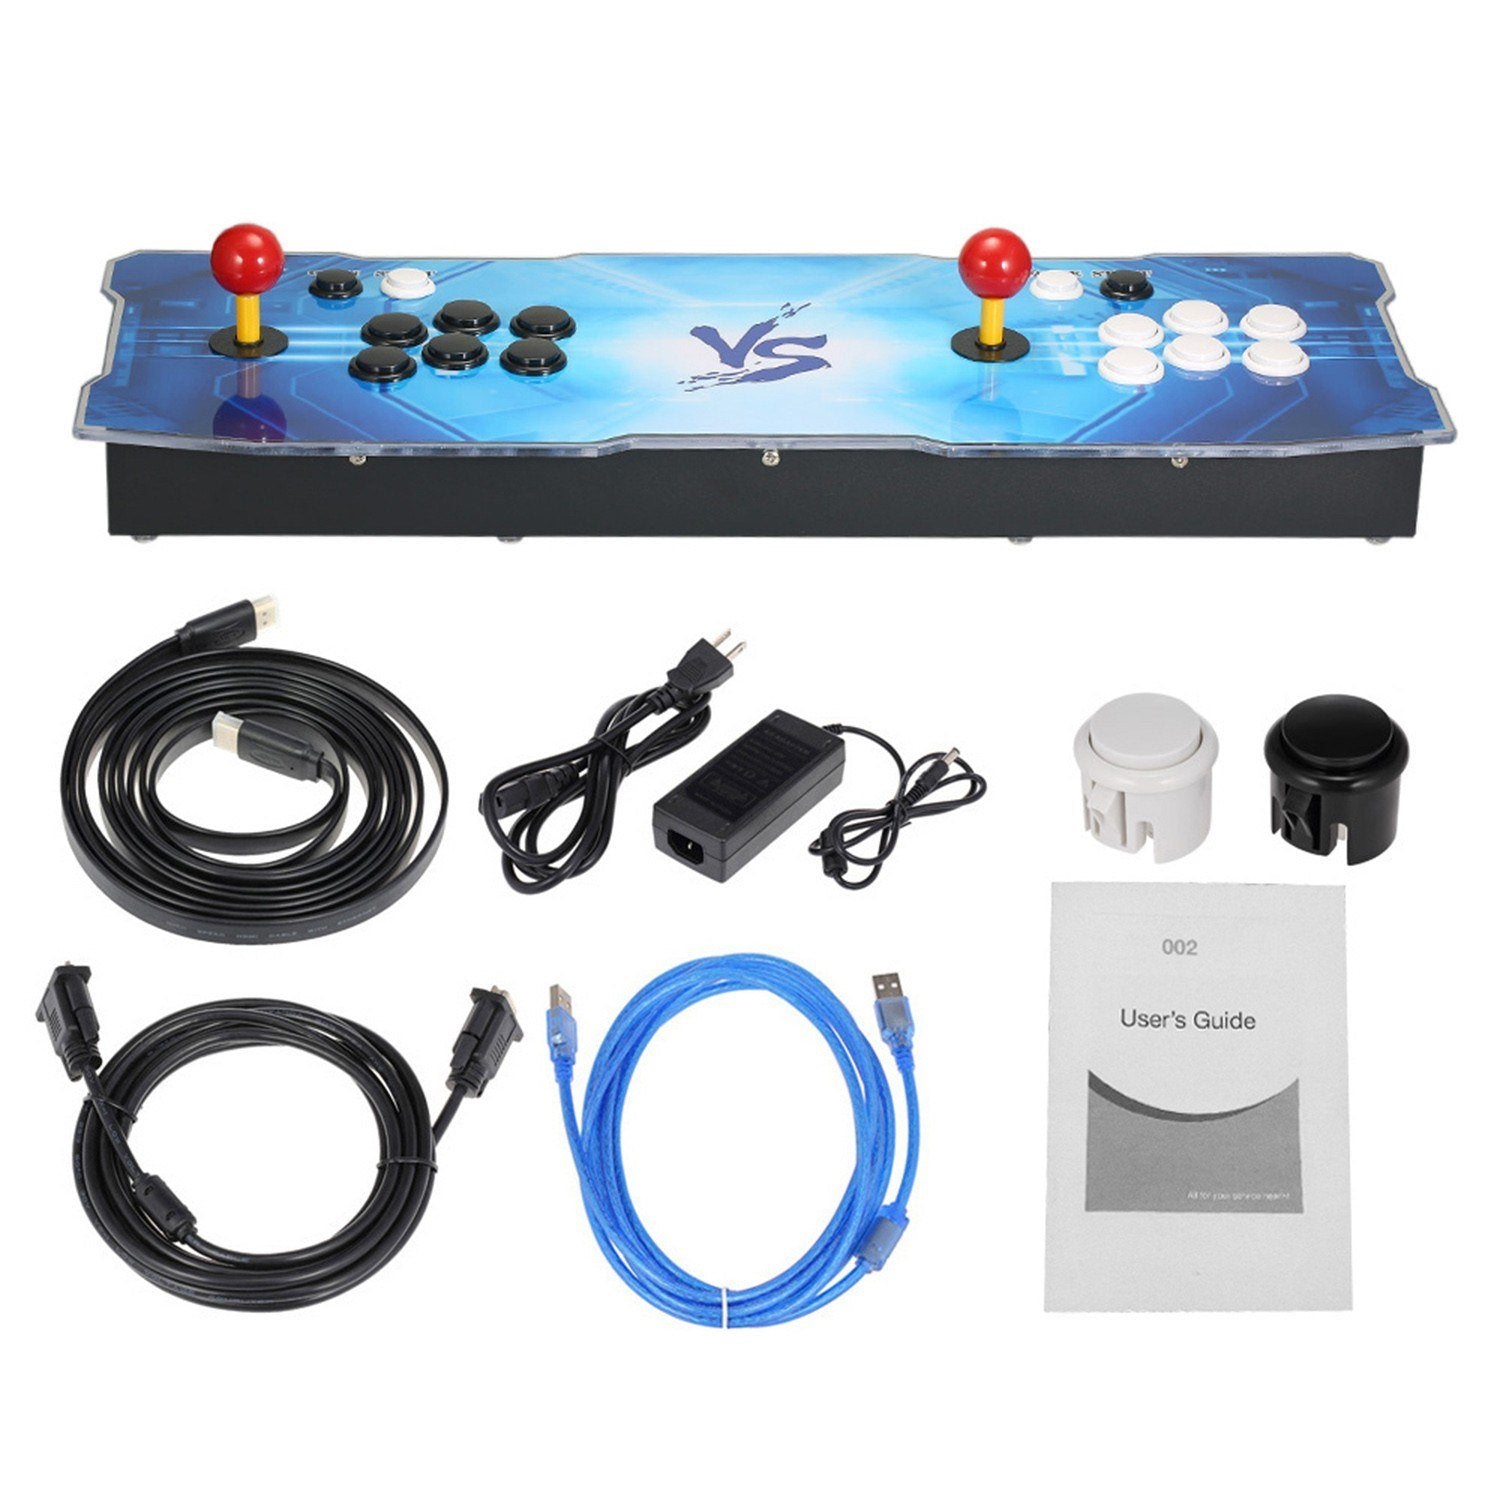 Arcade Console Integrated 3188 in 1 Games Station Machine